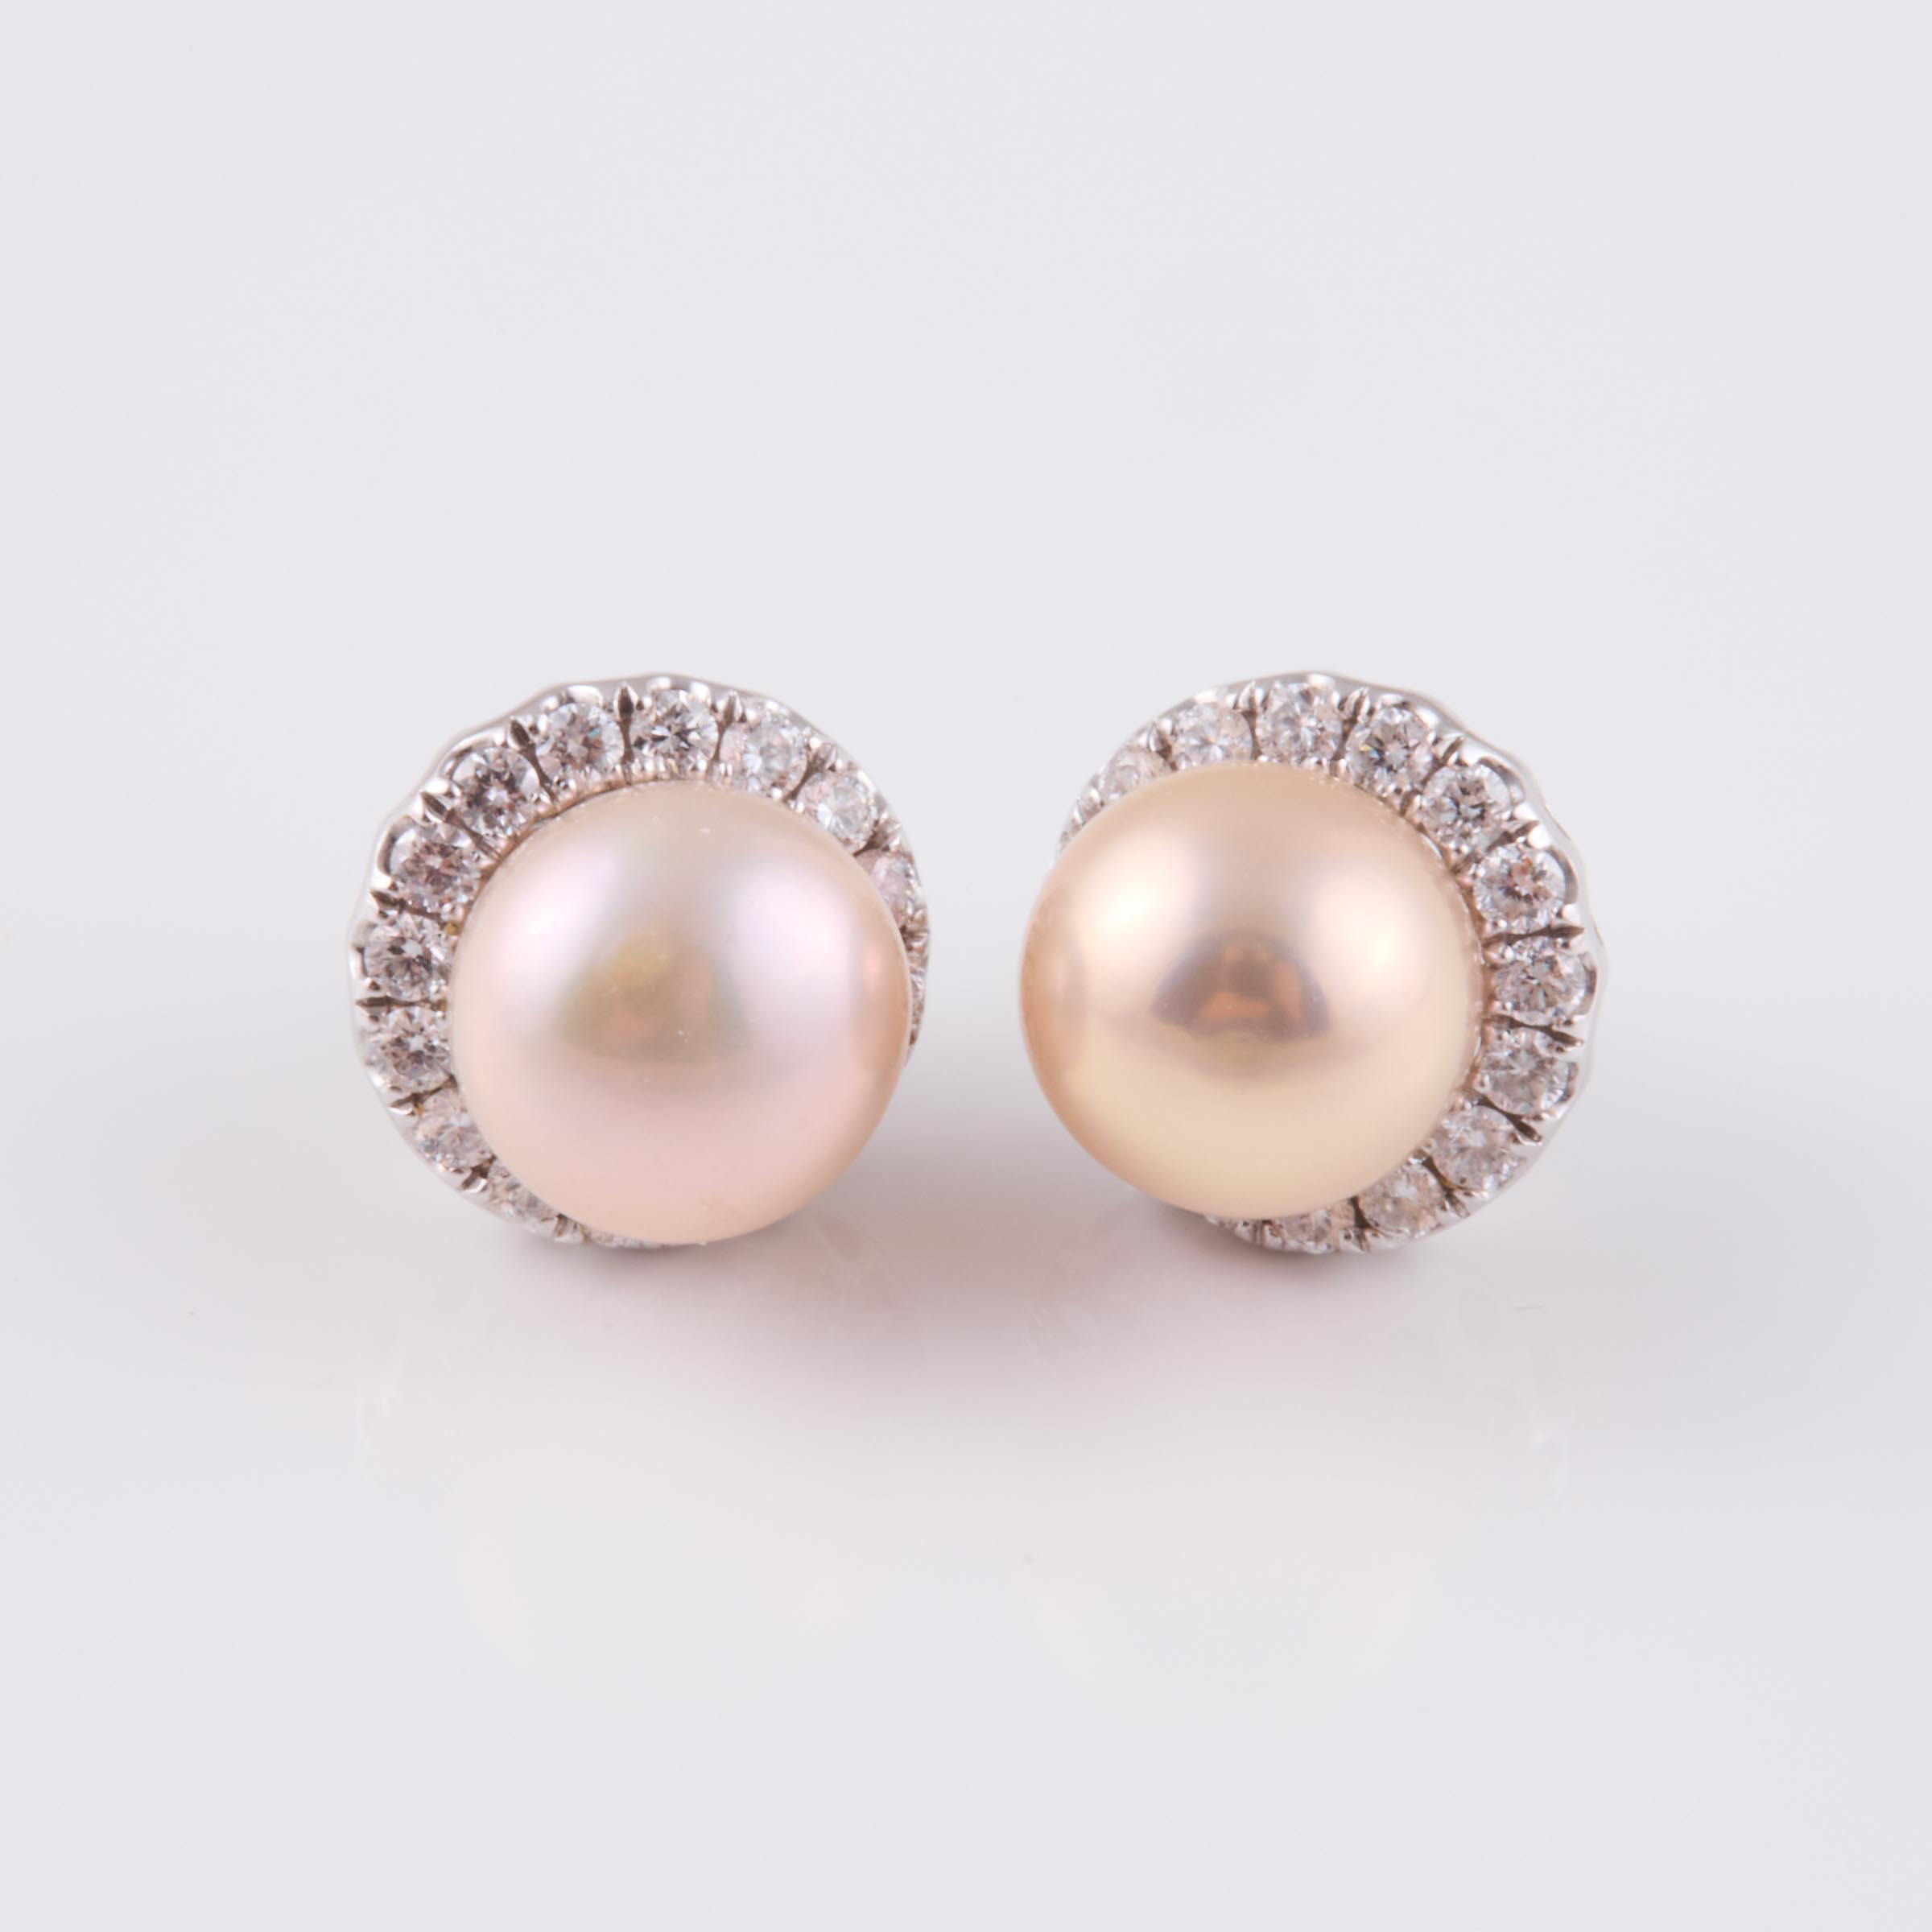 Pair Of Cultured Pearl And Sterling Silver Earrings